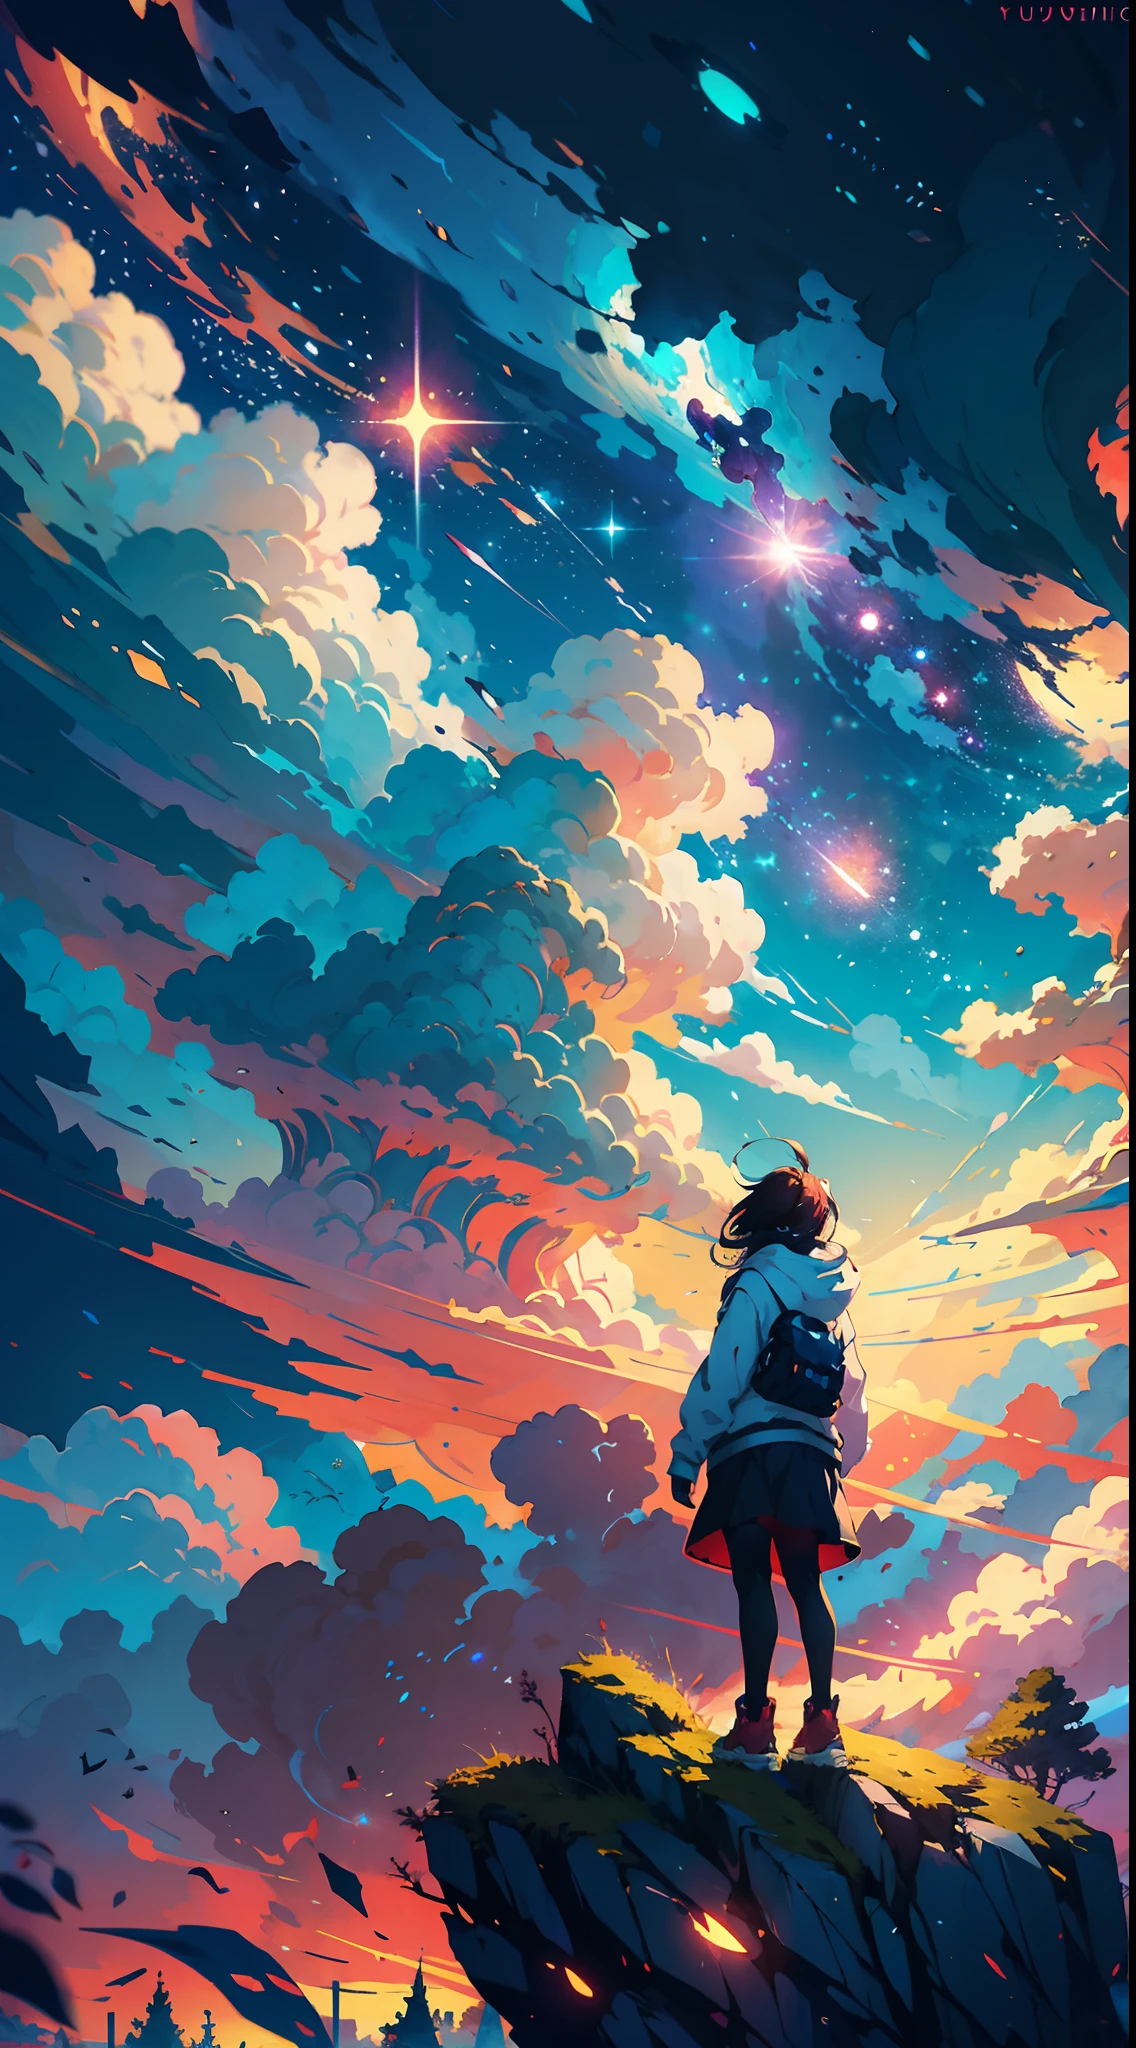 anime girl standing on a rock looking at a star filled sky, makoto shinkai cyril rolando, anime art wallpaper 4k, anime art wallpaper 4 k, anime art wallpaper 8 k, cosmic skies. by makoto shinkai, inspired by Cyril Rolando, in the style dan mumford artwork, amazing wallpaper, by Yuumei